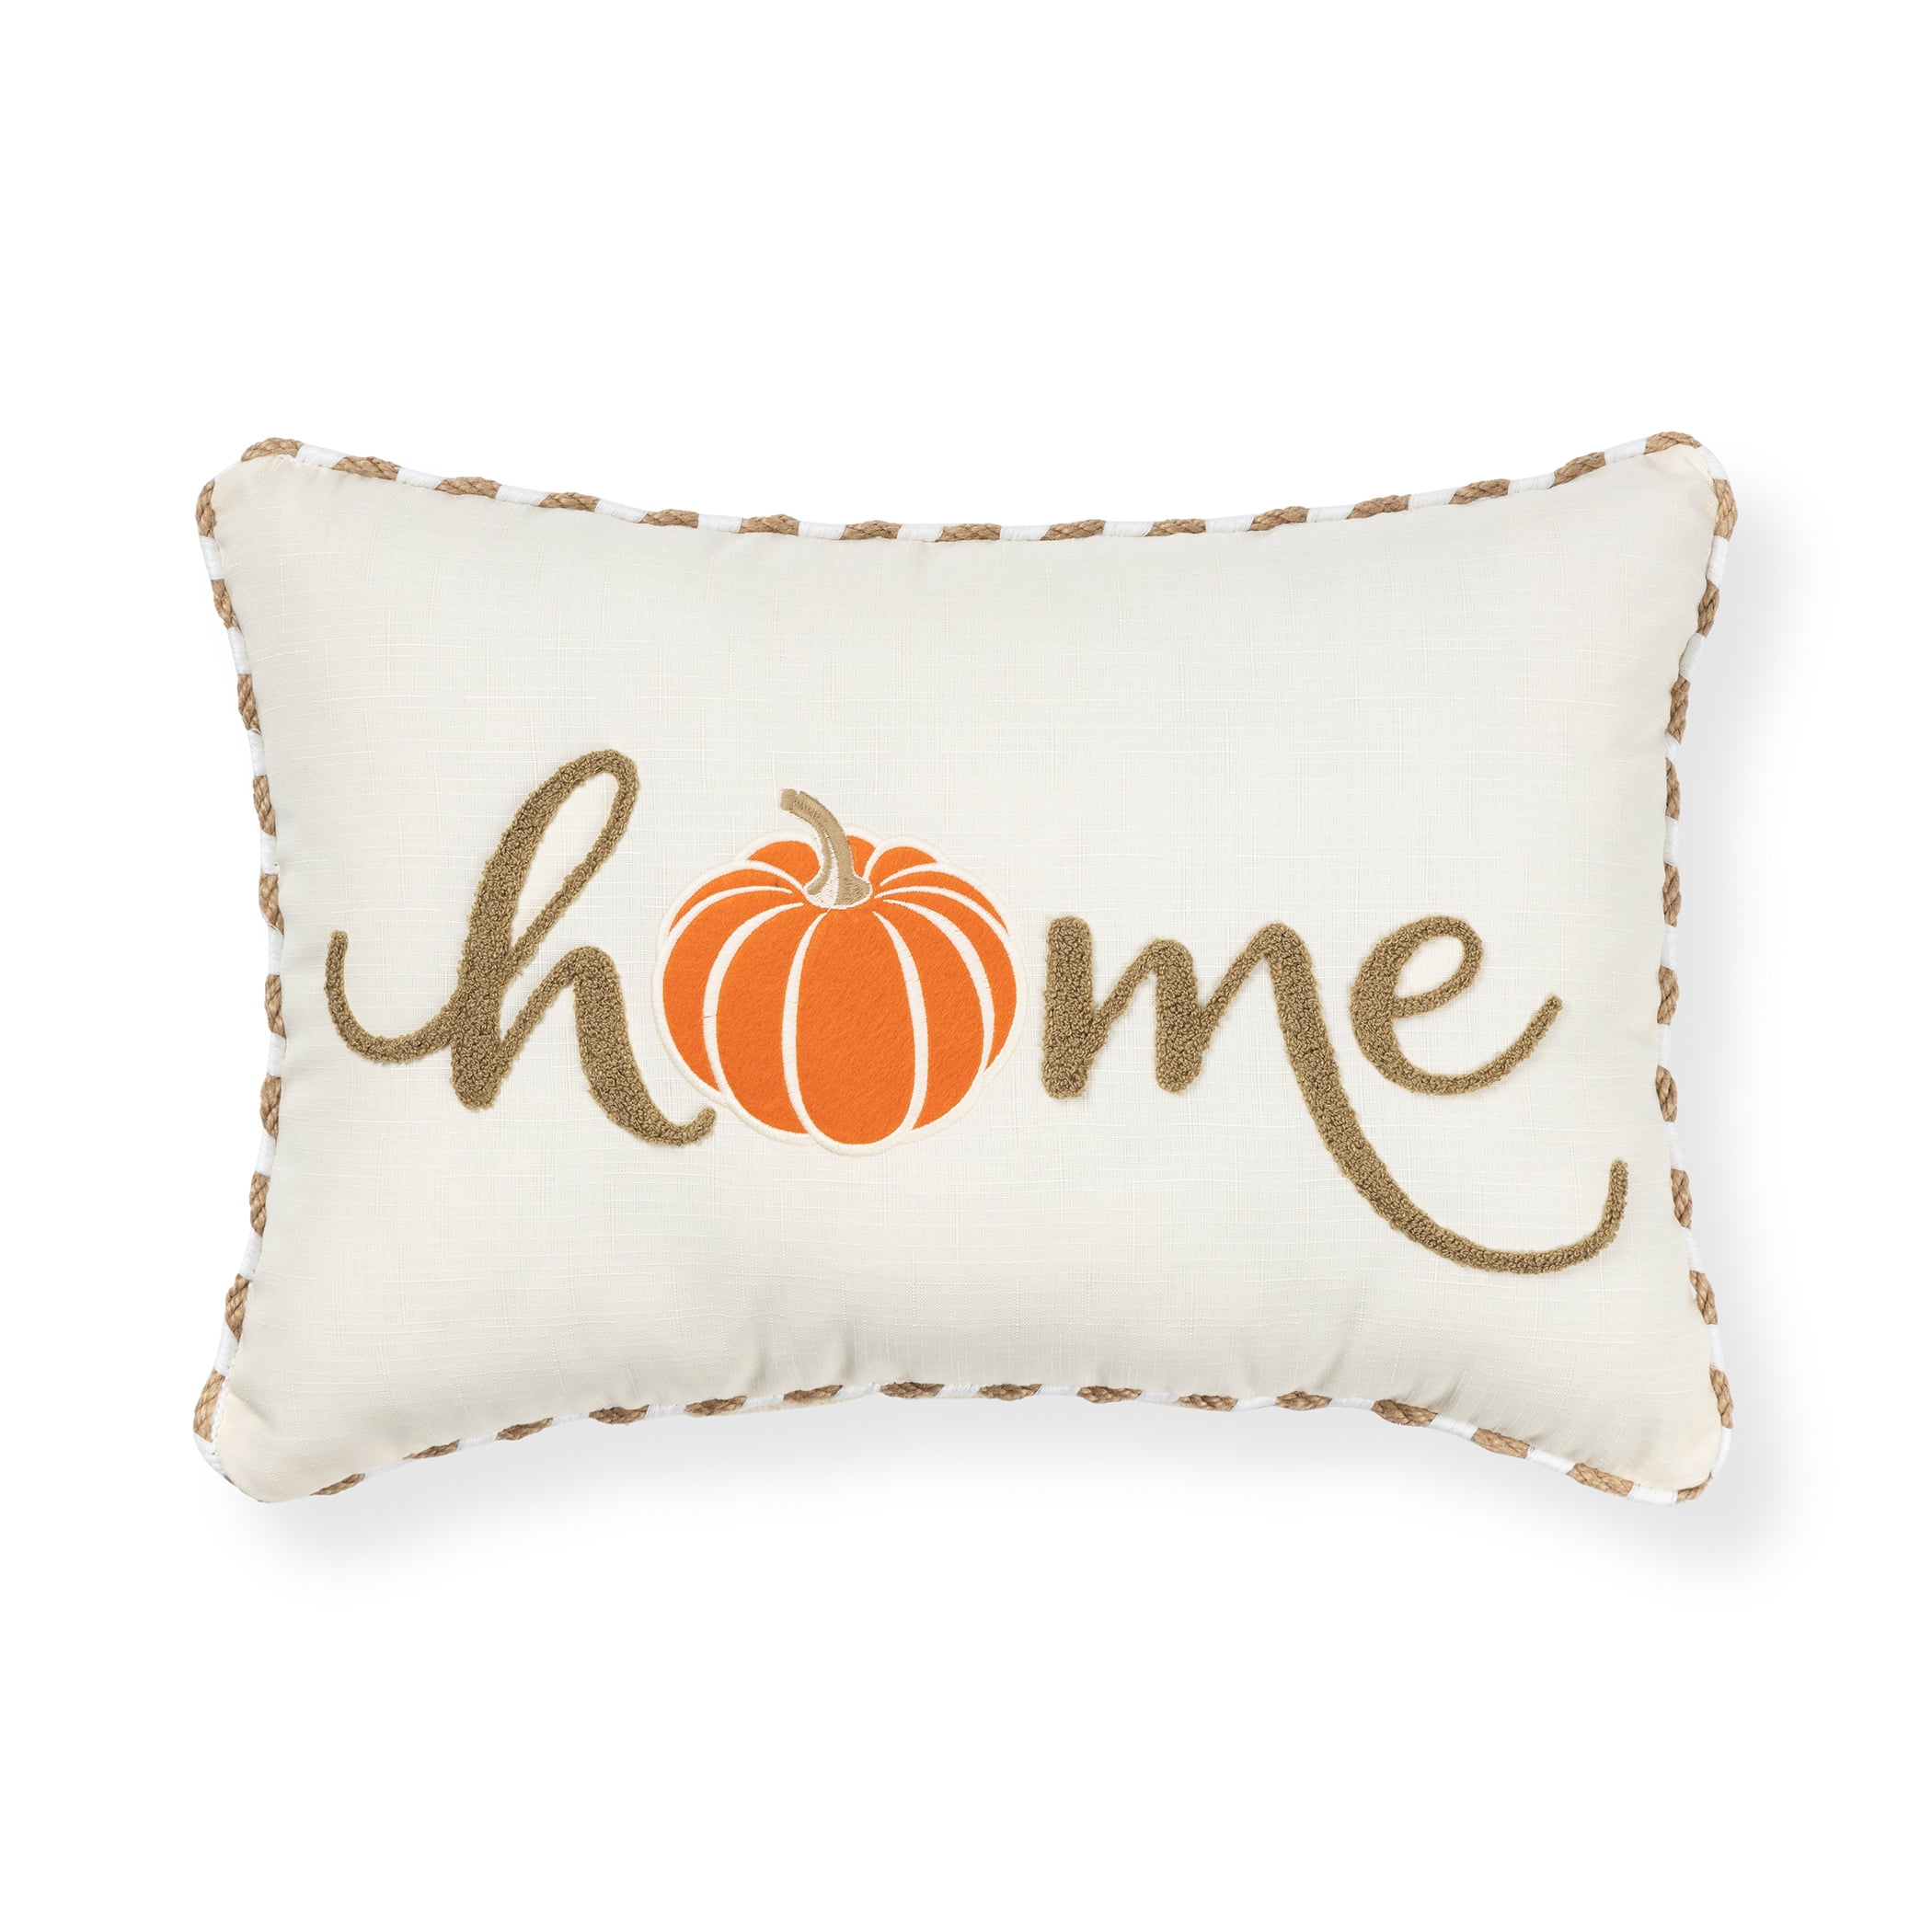 VHC BRANDS Wheat Plaid Golden Tan Soft White Harvest Pumpkin 18 in. x 18  in. Throw Pillow 80551 - The Home Depot